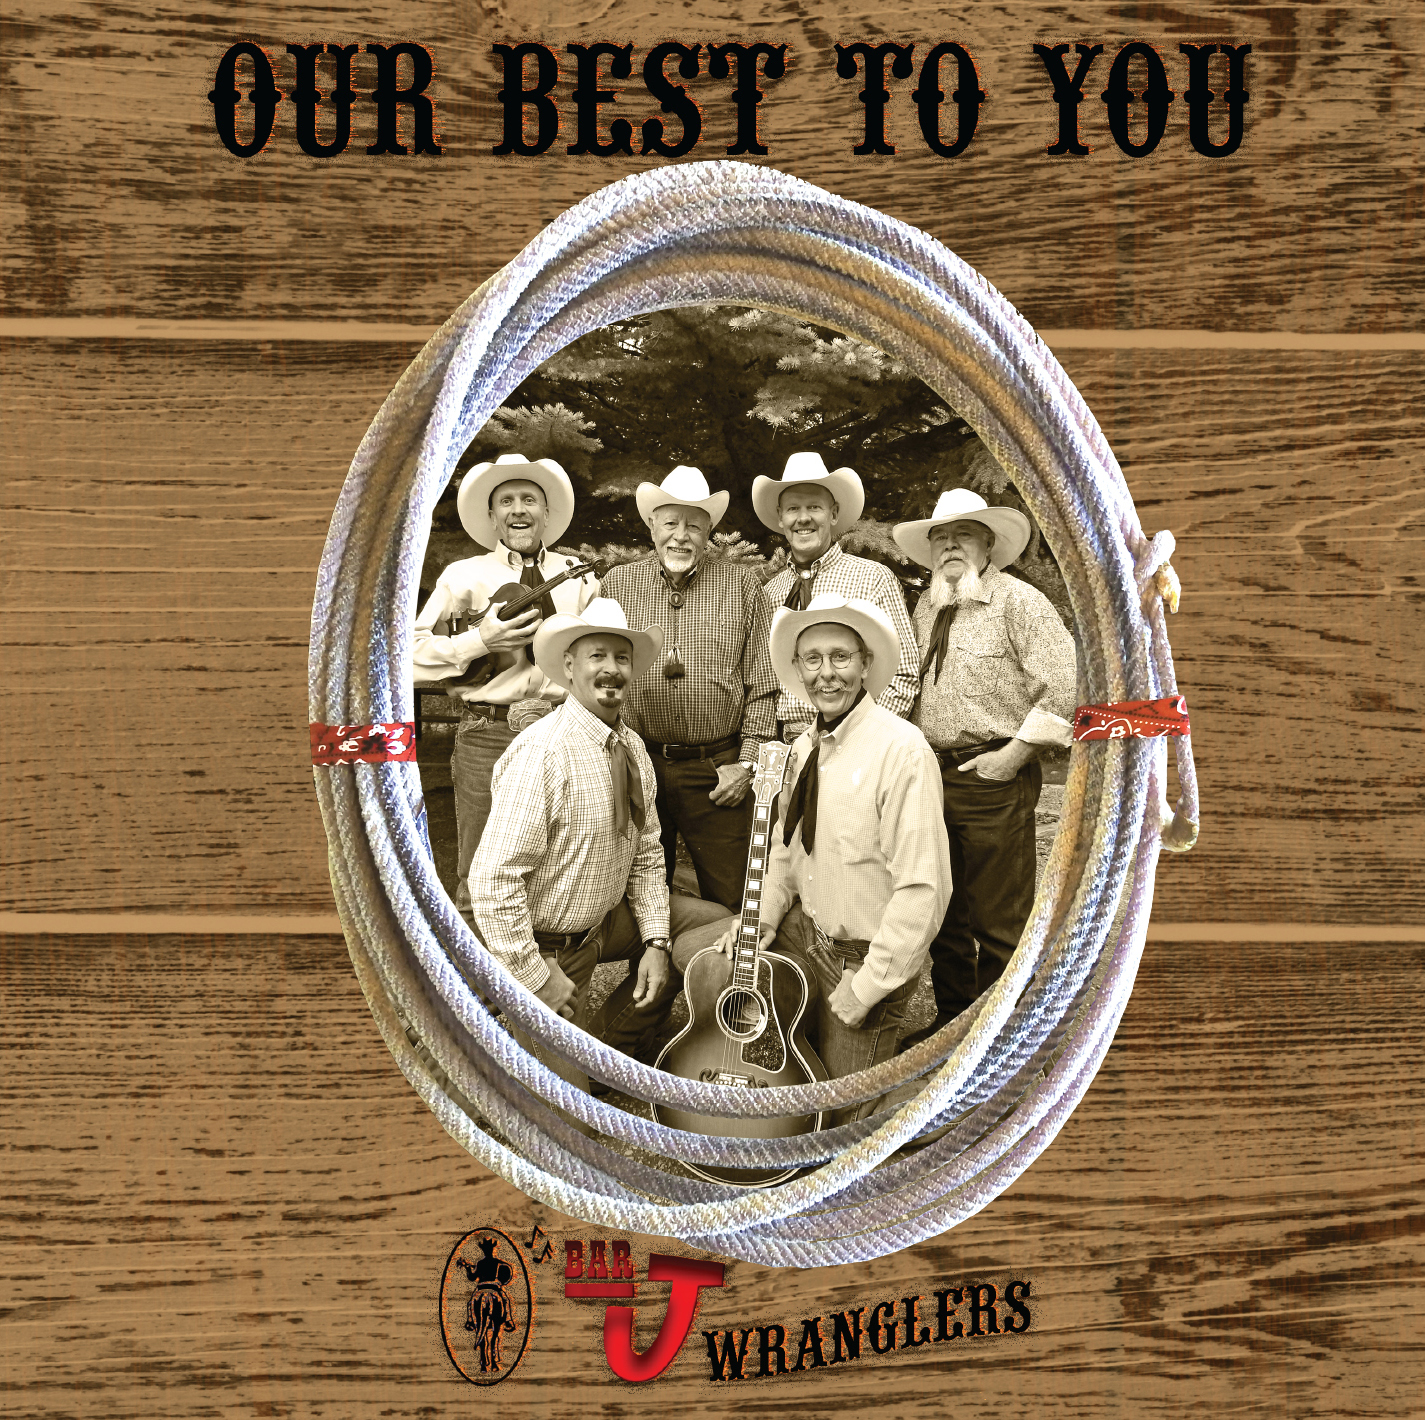 Bar J Wranglers "Our Best to You"